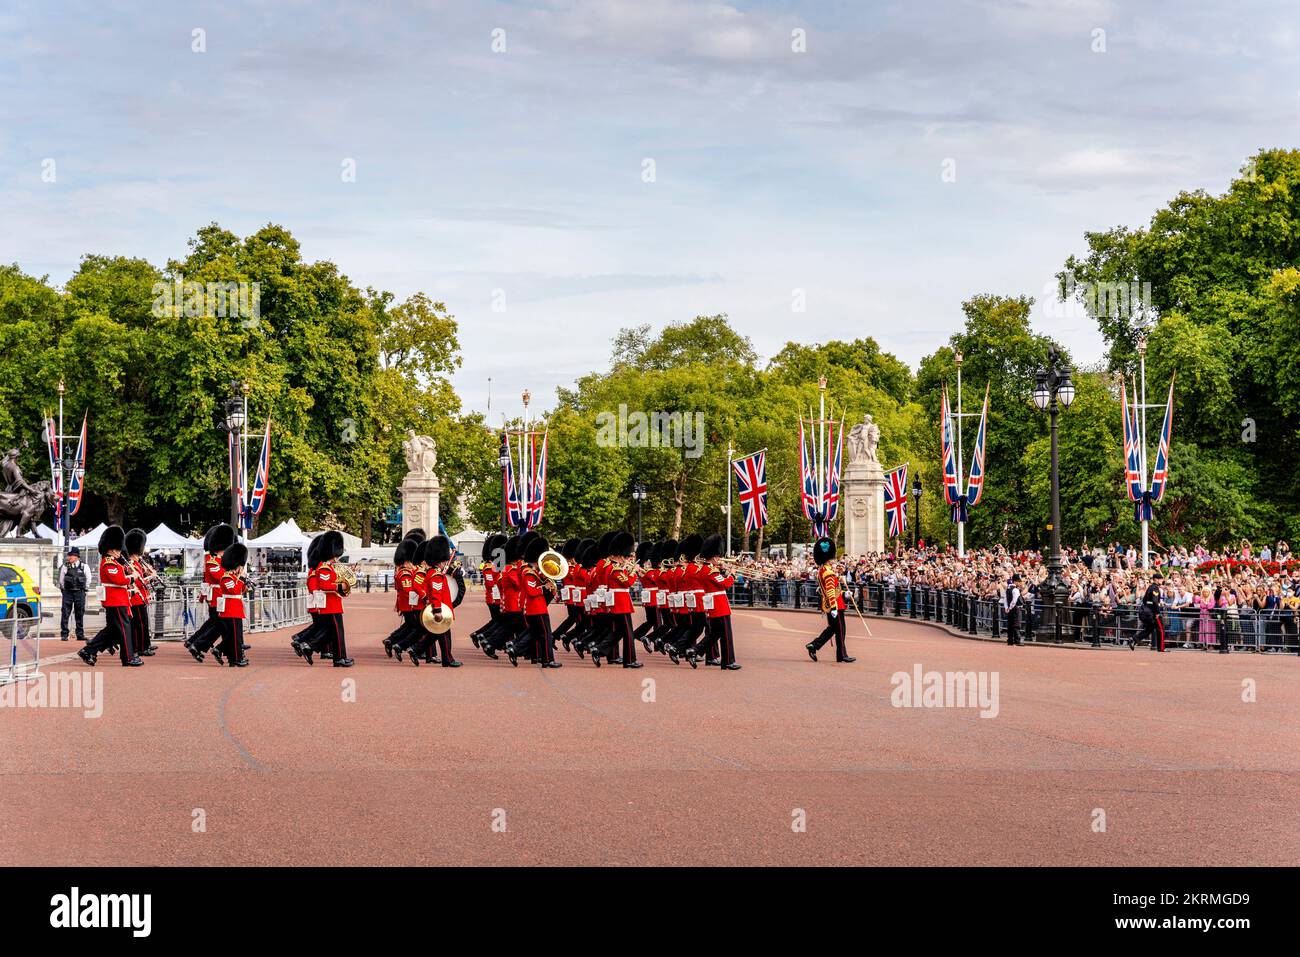 Crowds Watch The Irish Guards Leaving Buckingham Palace After The Changing Of The Guard Ceremony Following The Death Of Queen Elizabeth II, London, UK Stock Photo